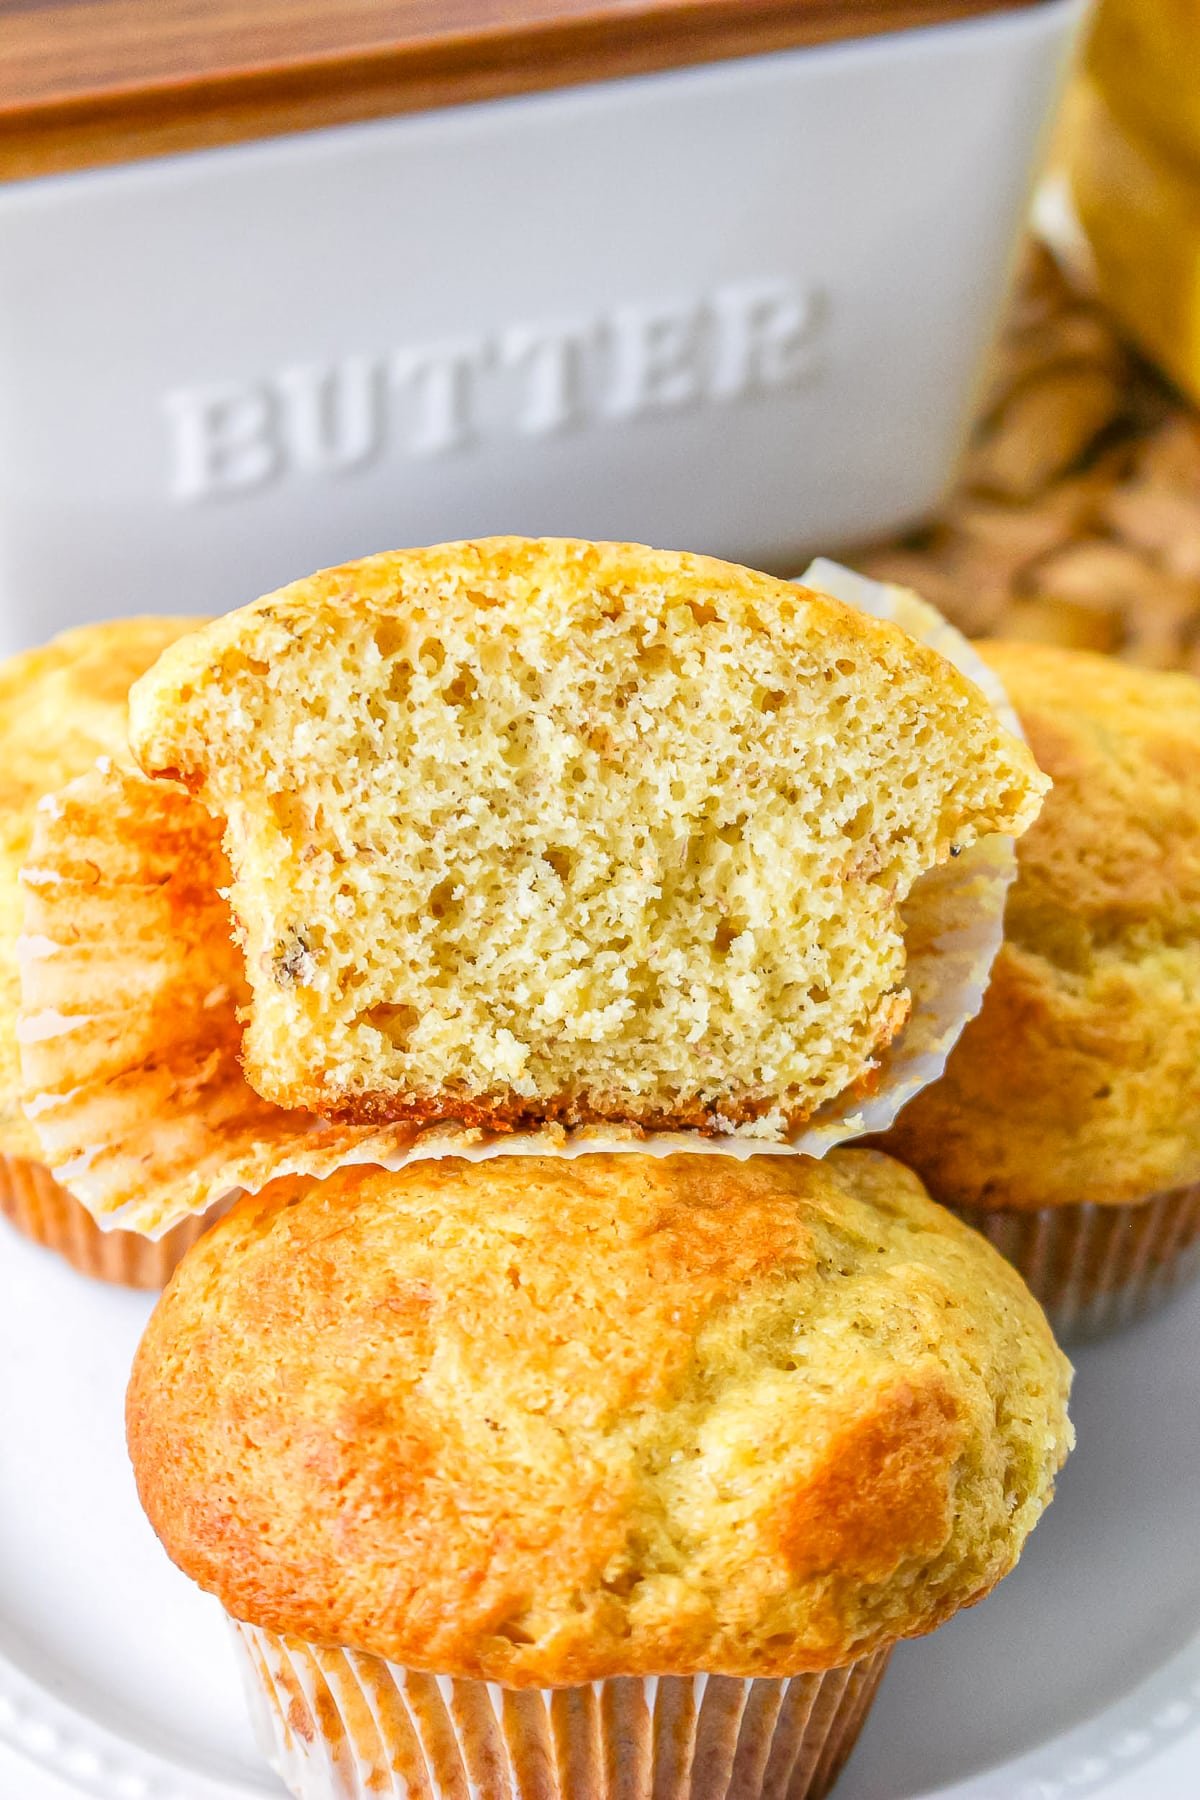 Cake Mix Muffins cut in half to see the interior